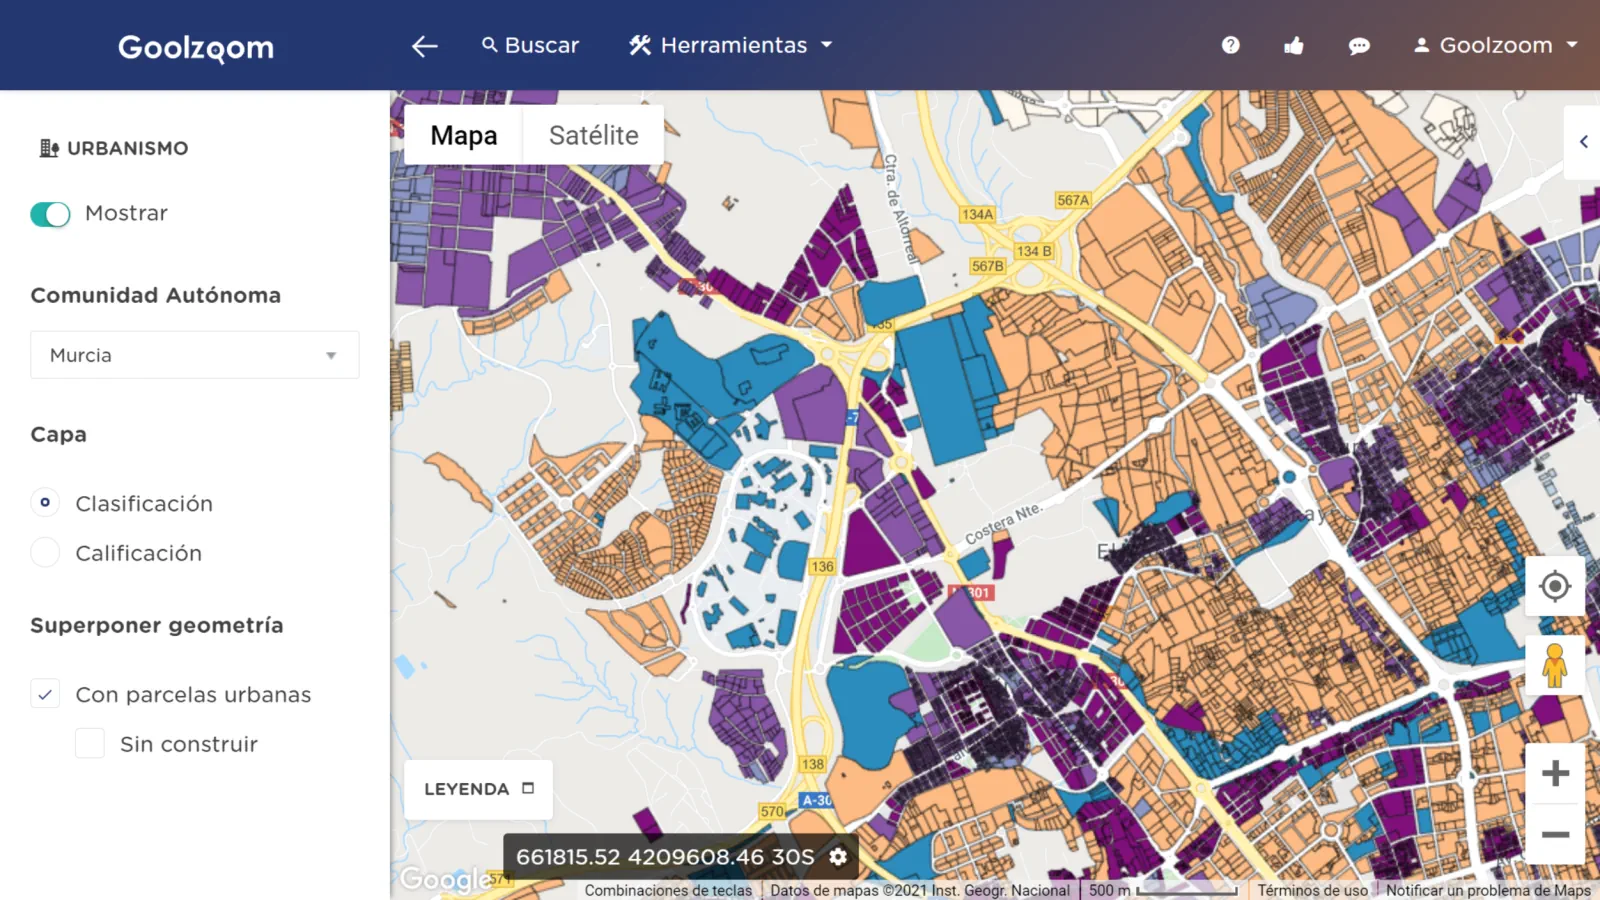 The tool for consulting urban planning in Spain